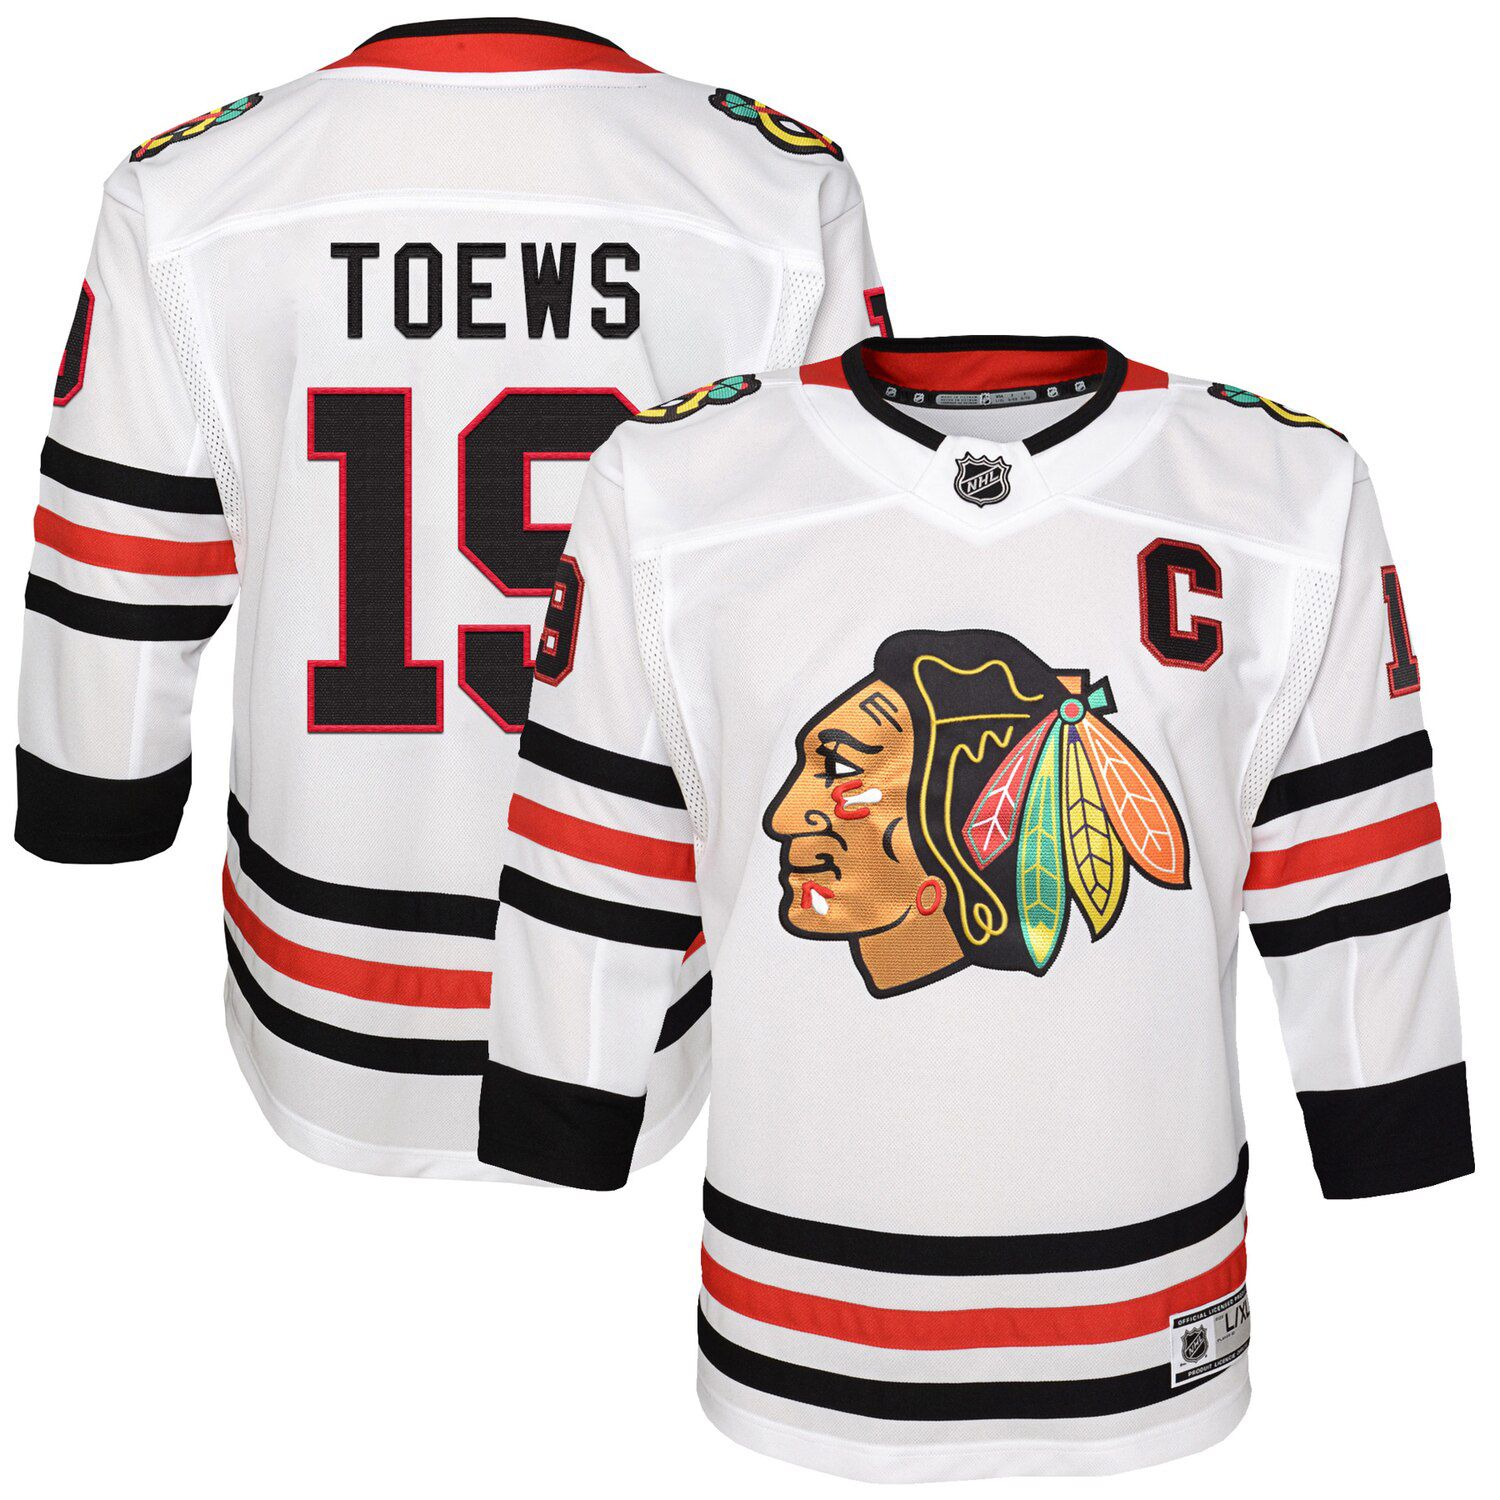 youth toews jersey